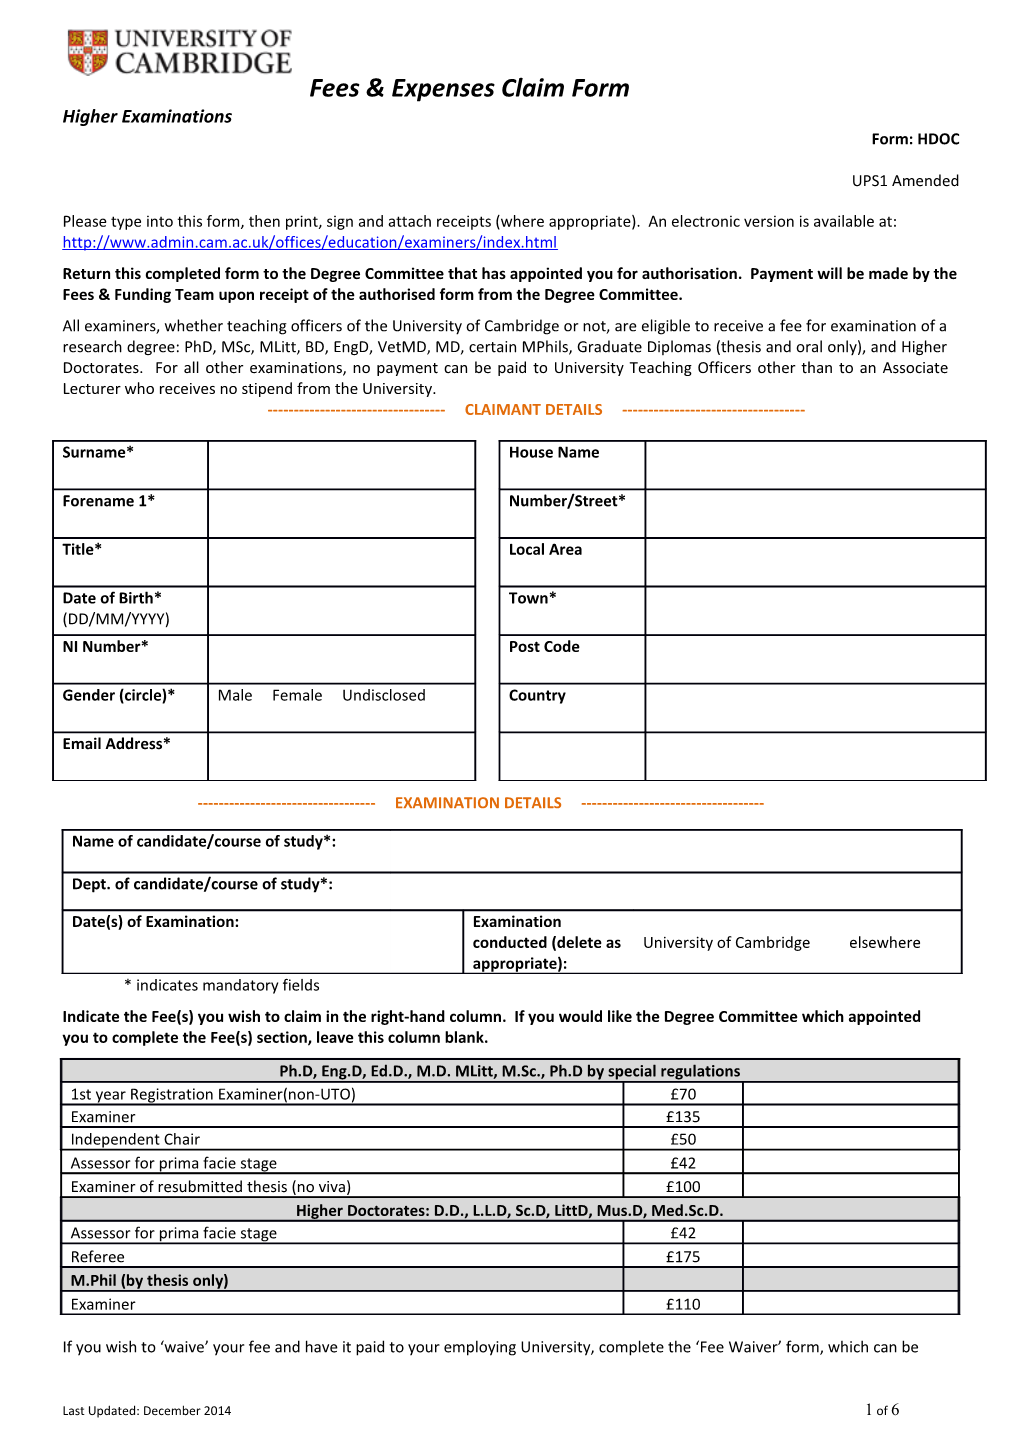 Fees and Expenses Claim Form